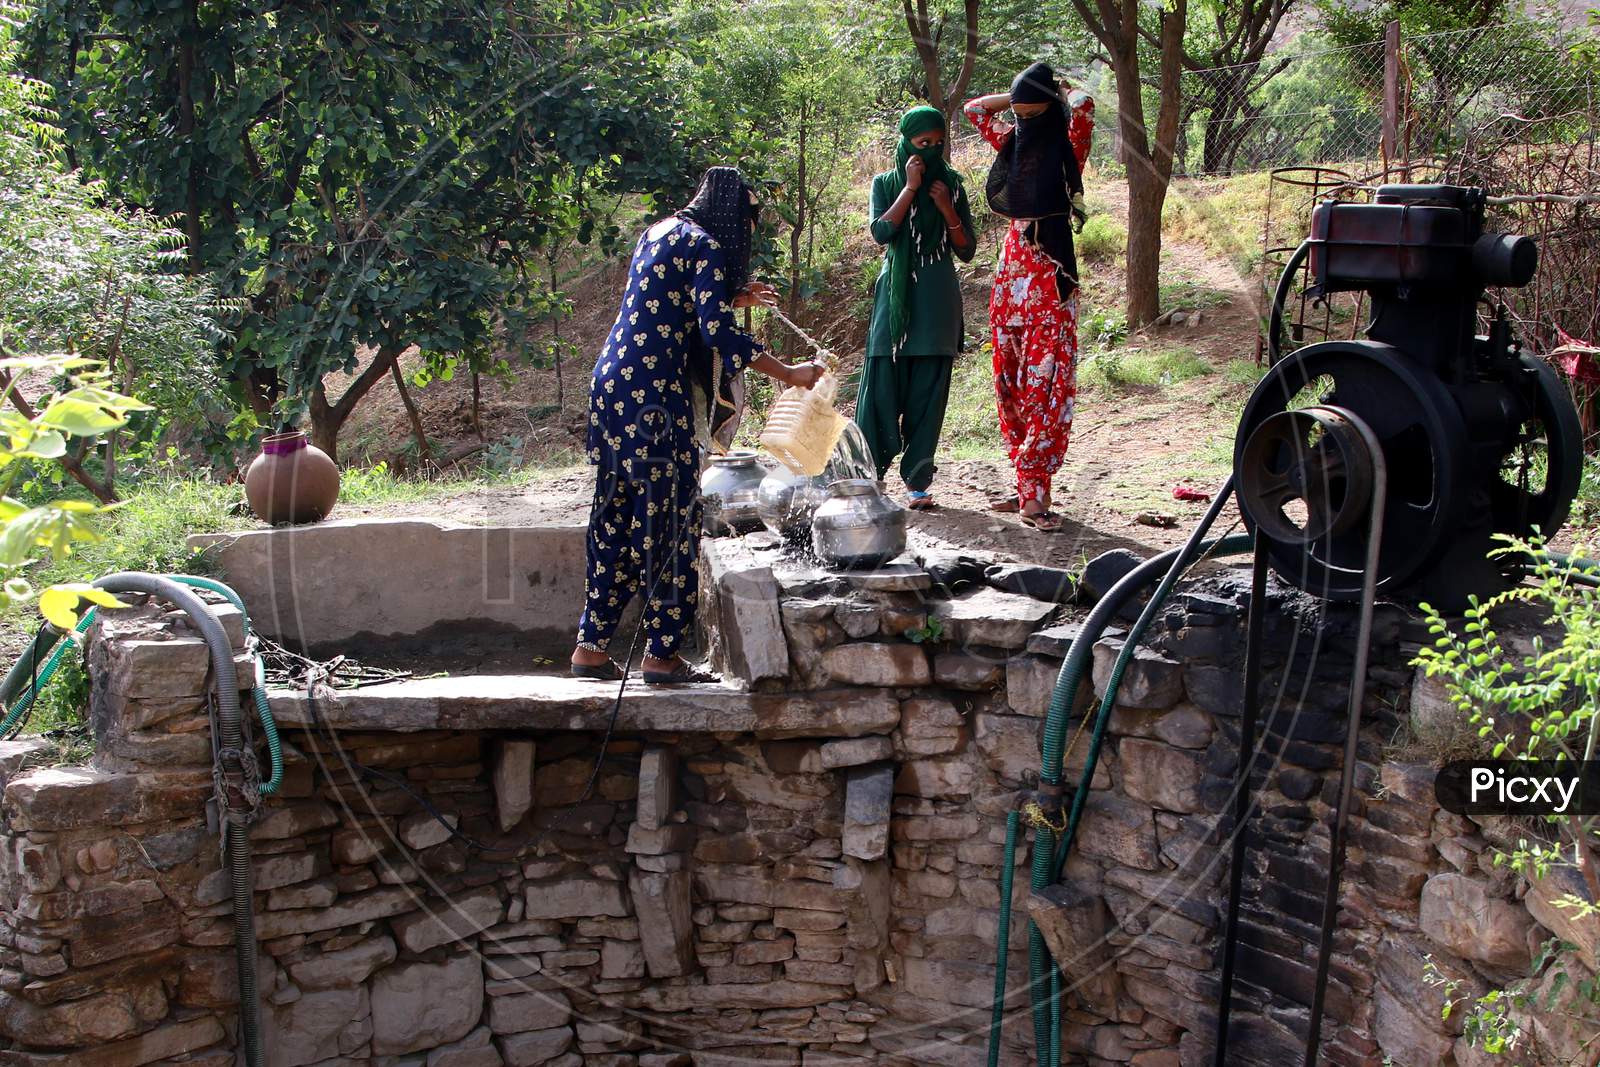 People Fetch Drinking Water From A Well During Hot Summer Day On The Outskirts Of Ajmer, Rajasthan, India.